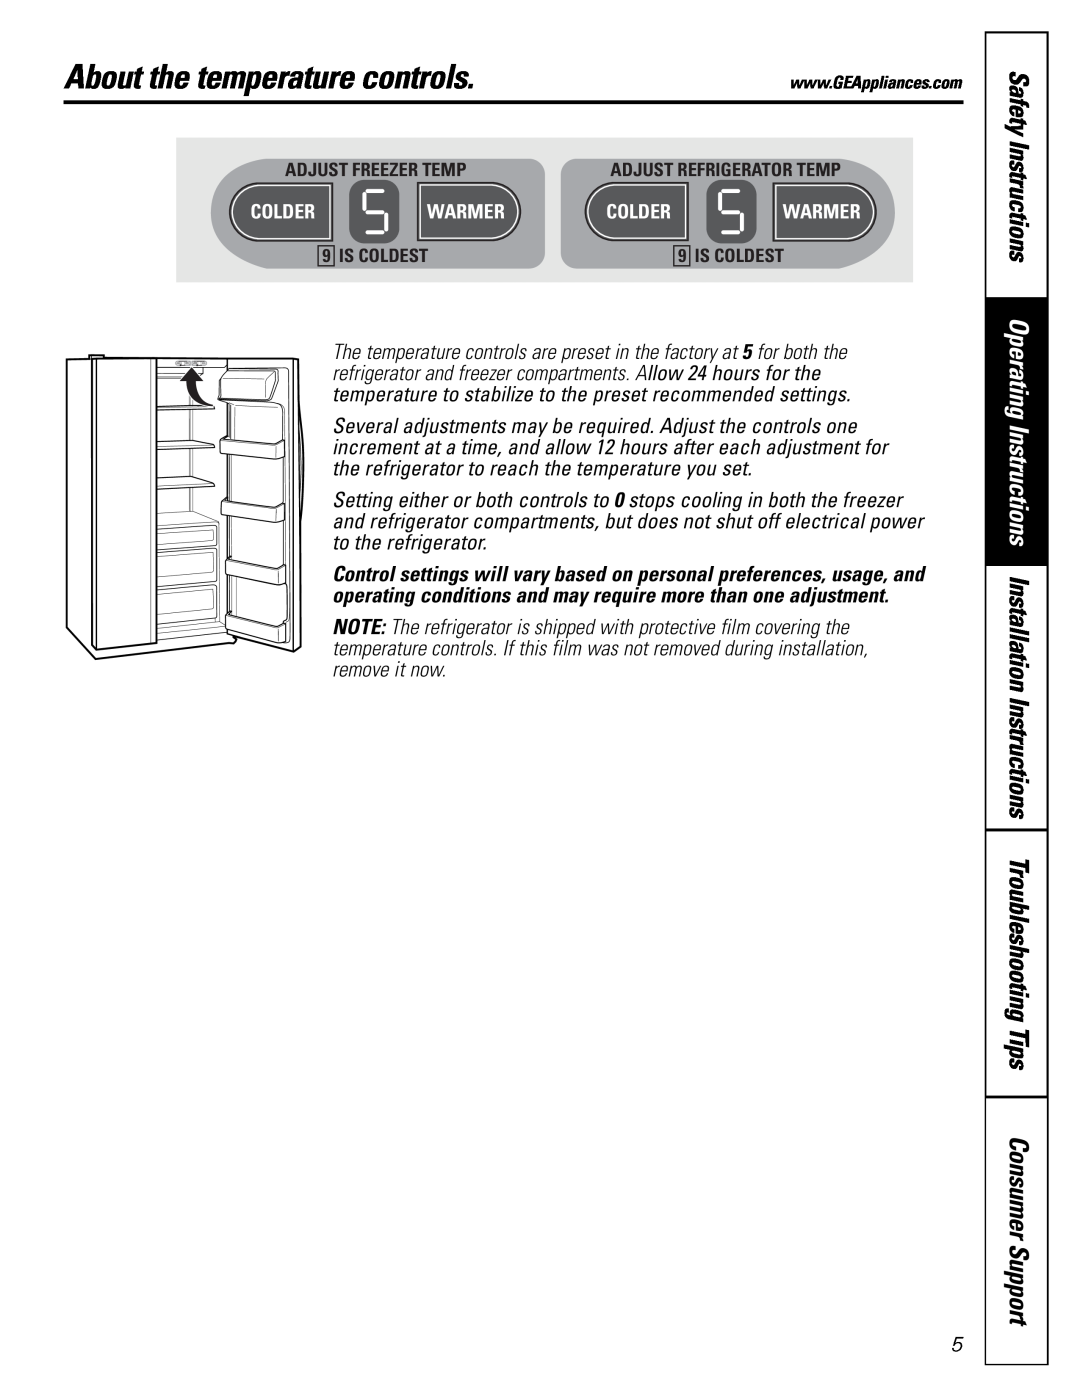 GE 25 installation instructions About the temperature controls, Warmer 